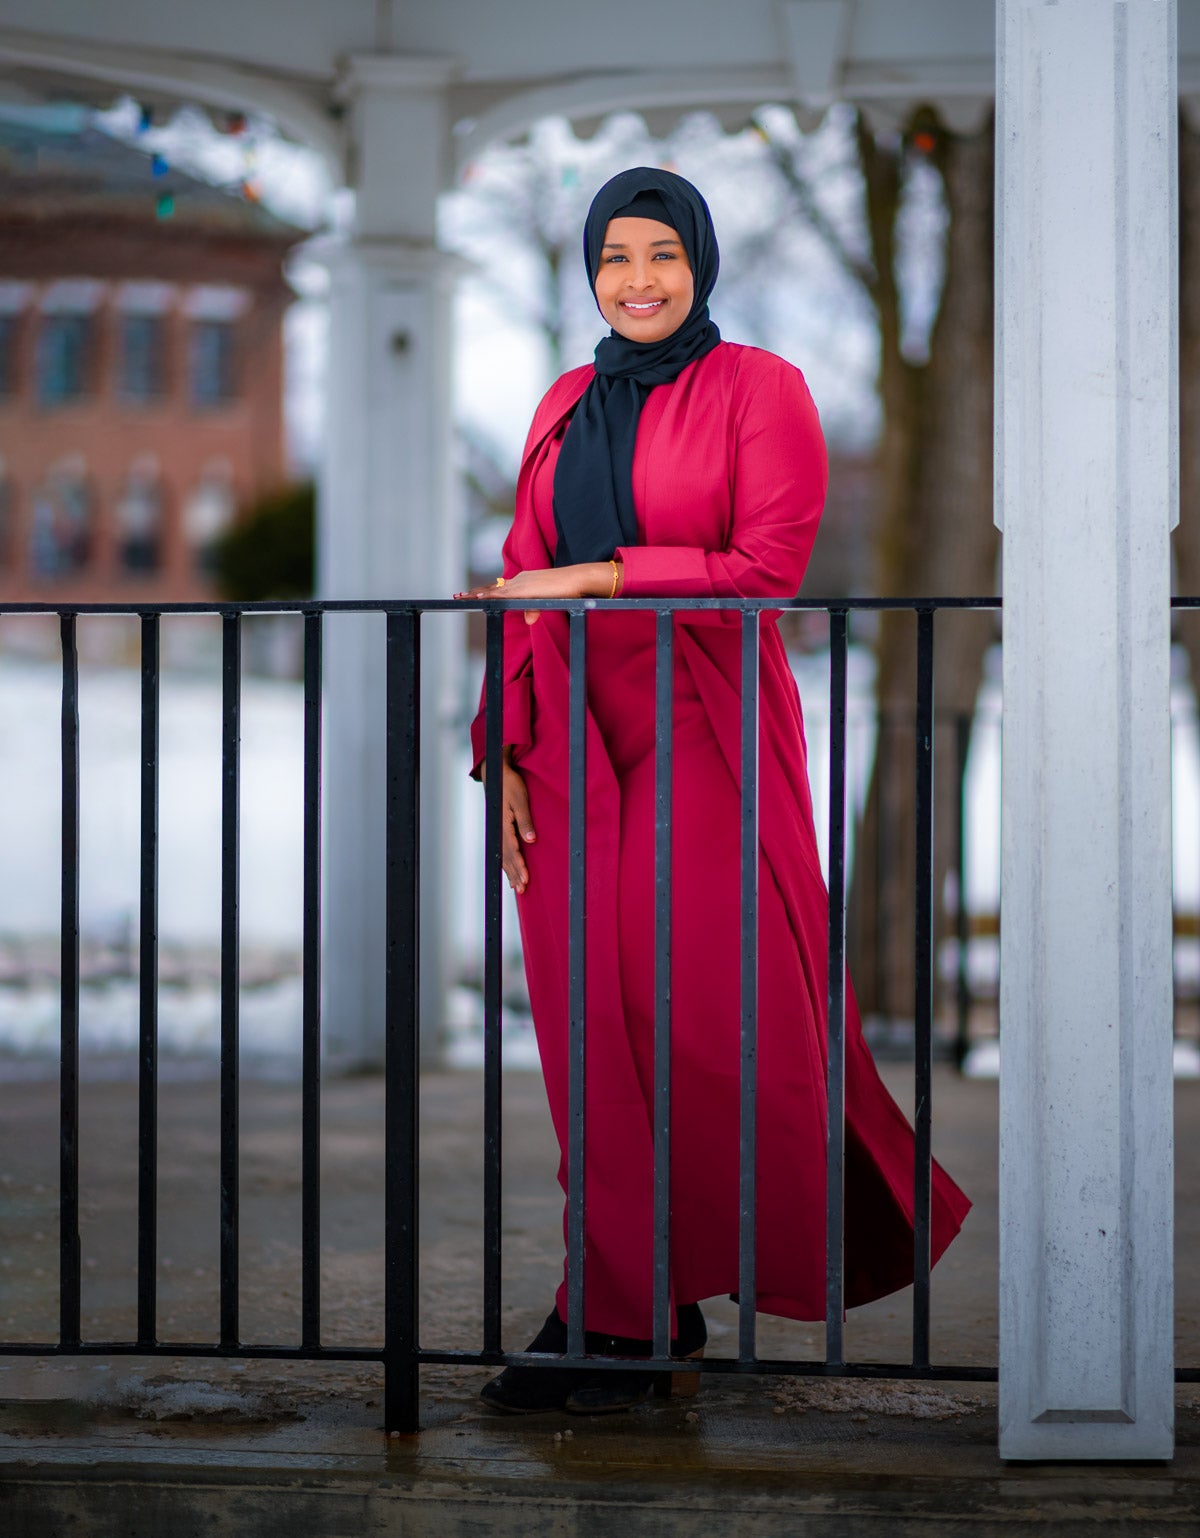 Business Leaders: Nonprofit founder Amina Hassan is Lewiston's leading light